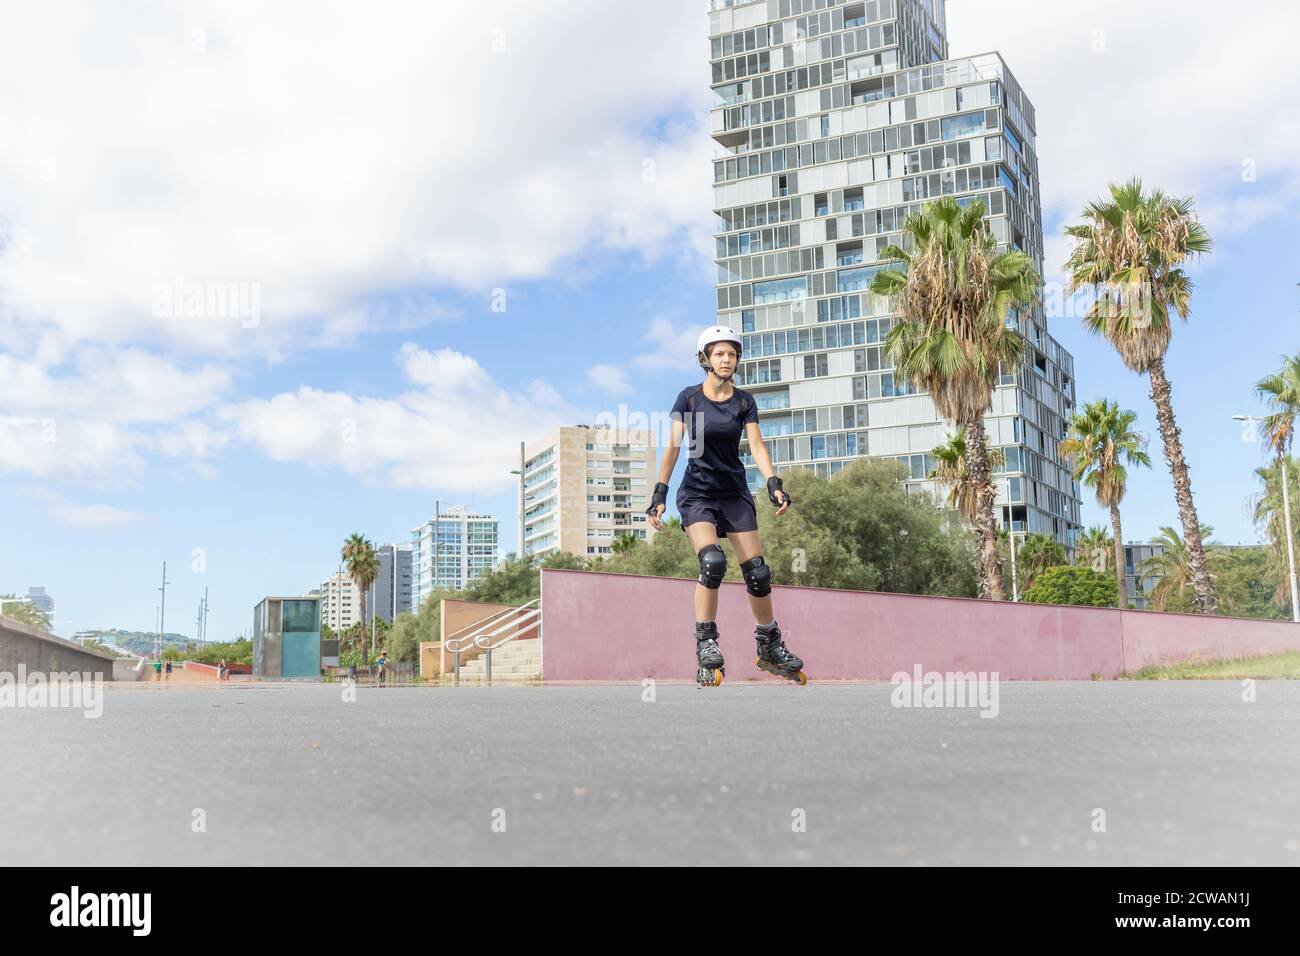 Young roller skater caucasian woman in the white helmet and black sporty clothes, cloudy day, skatepark, urban environment. Stock Photo